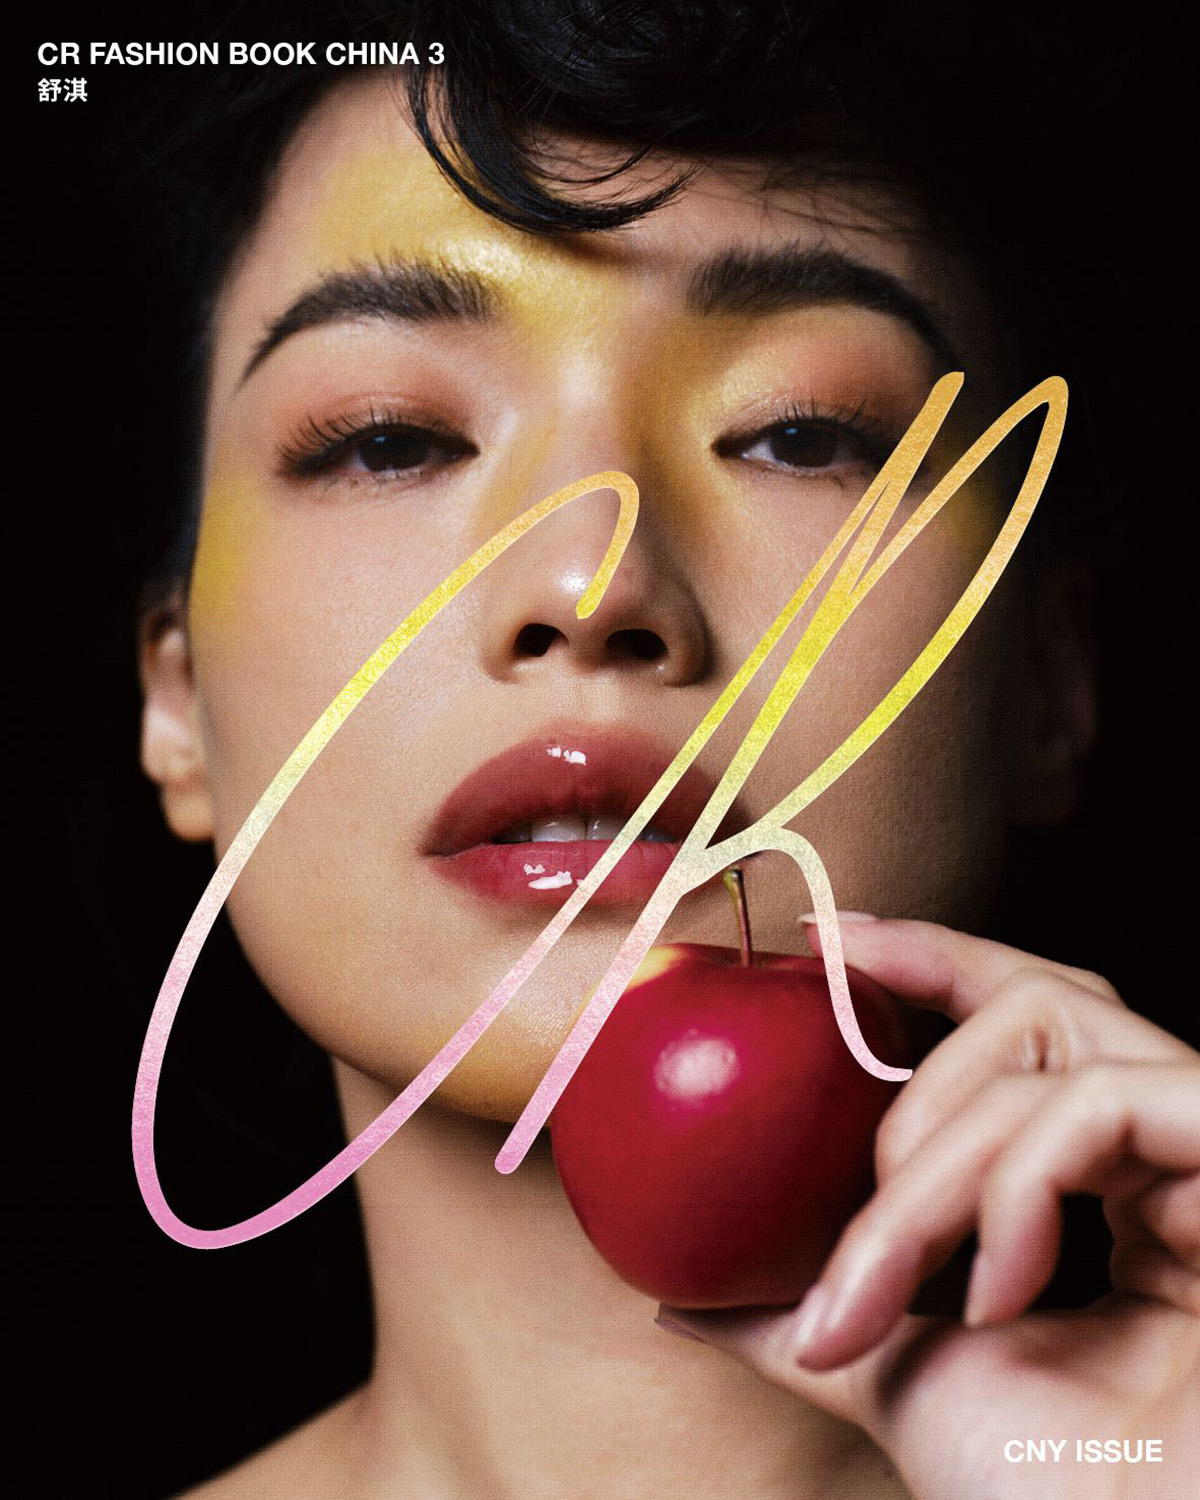 Shu Qi covers CR Fashion Book China Issue 03 by Leslie Zhang